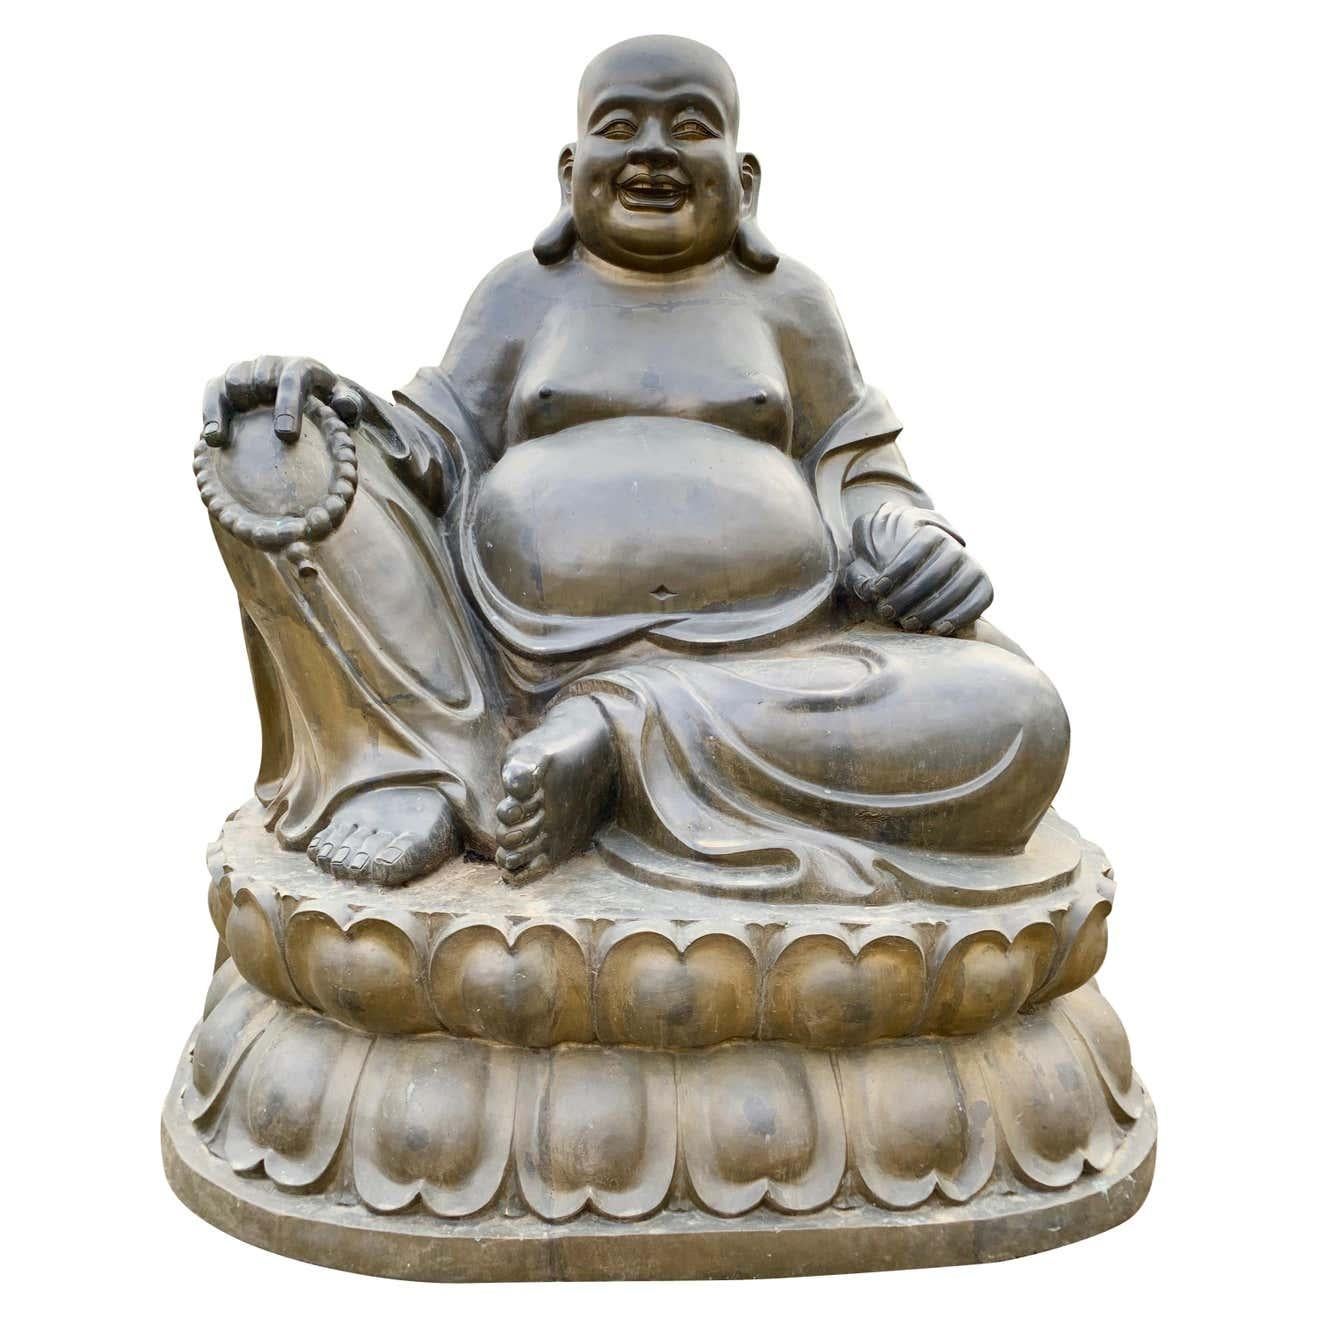 A large 20th century bronze laughing Budai originally from the New York apartment of John Legend, an American singer and songwriter. Budai, Hotei or Pu-Tai is a semi-historical monk as well as deity who was introduced into the Japanese Buddhist